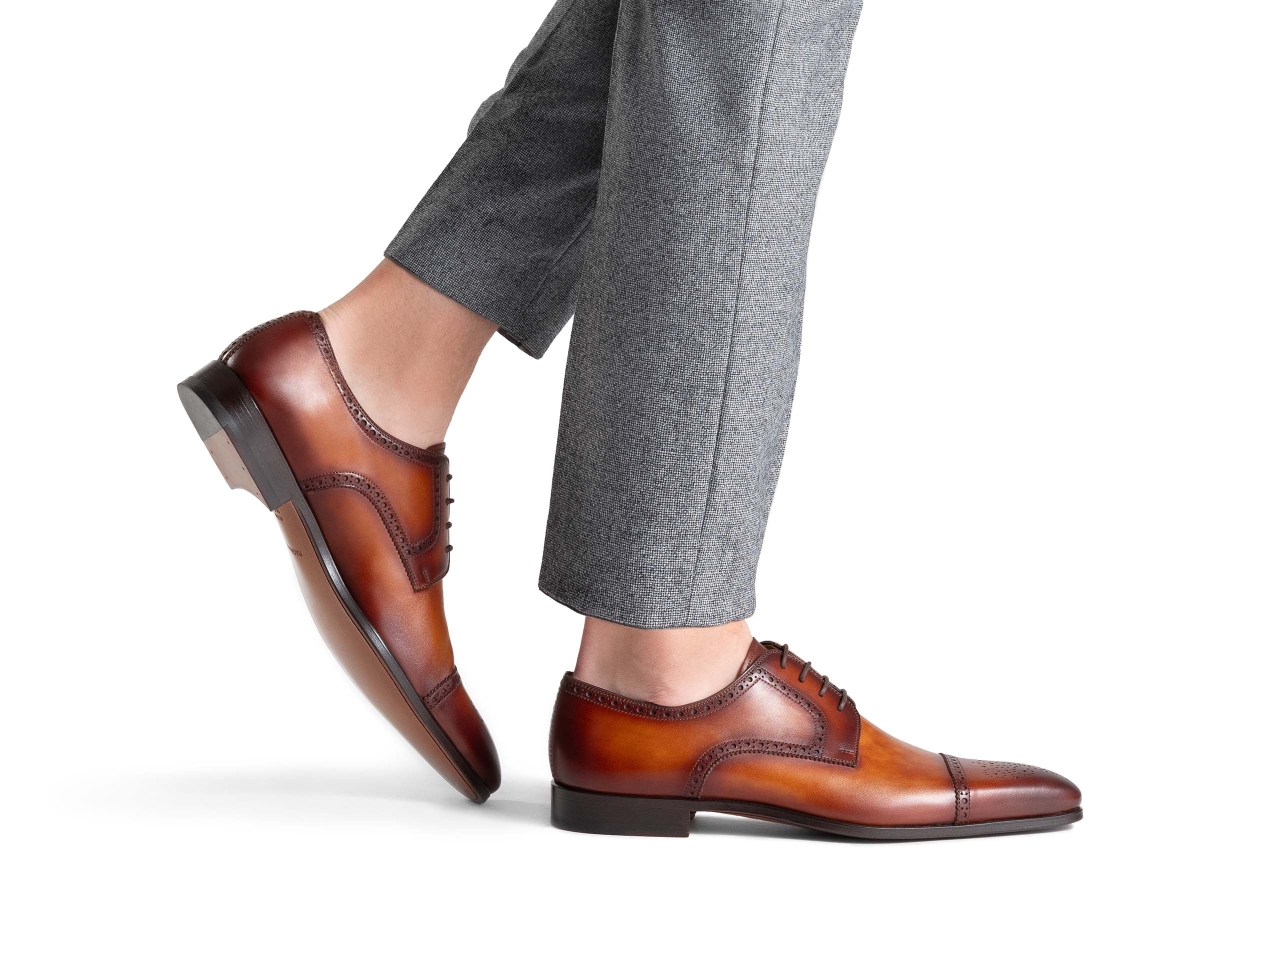 The Delphos Cuero pairs well with light grey pants